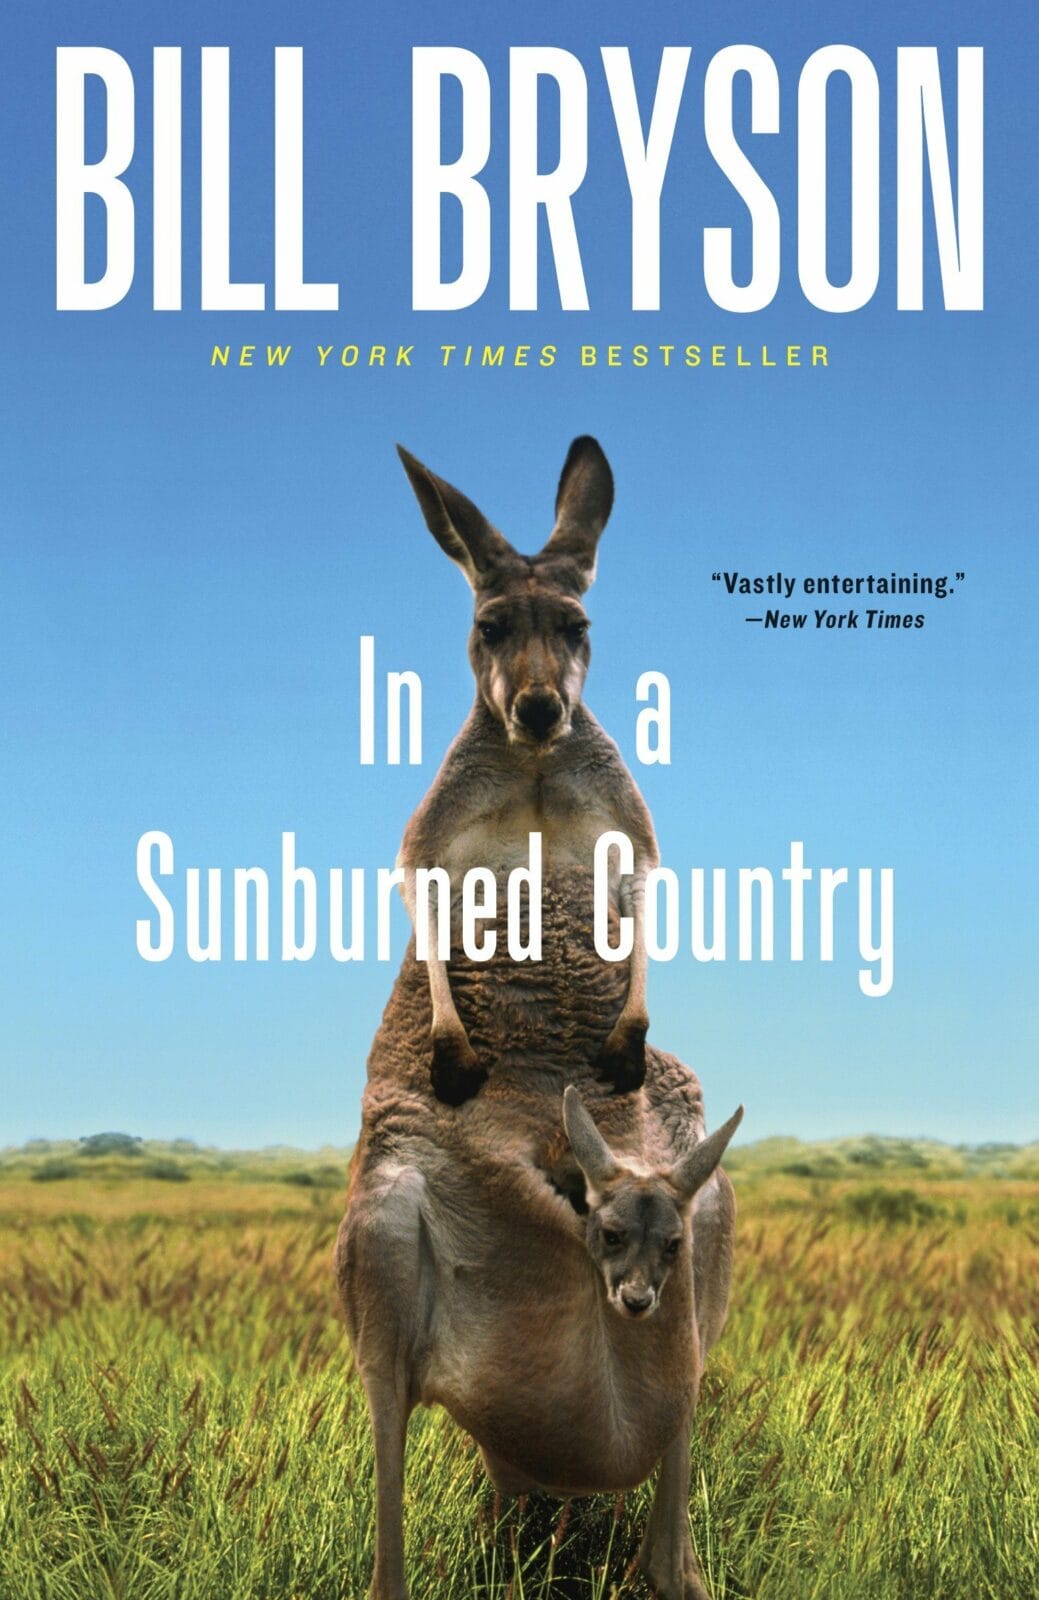 In a Sunburned Country, a book by Bill Bryson